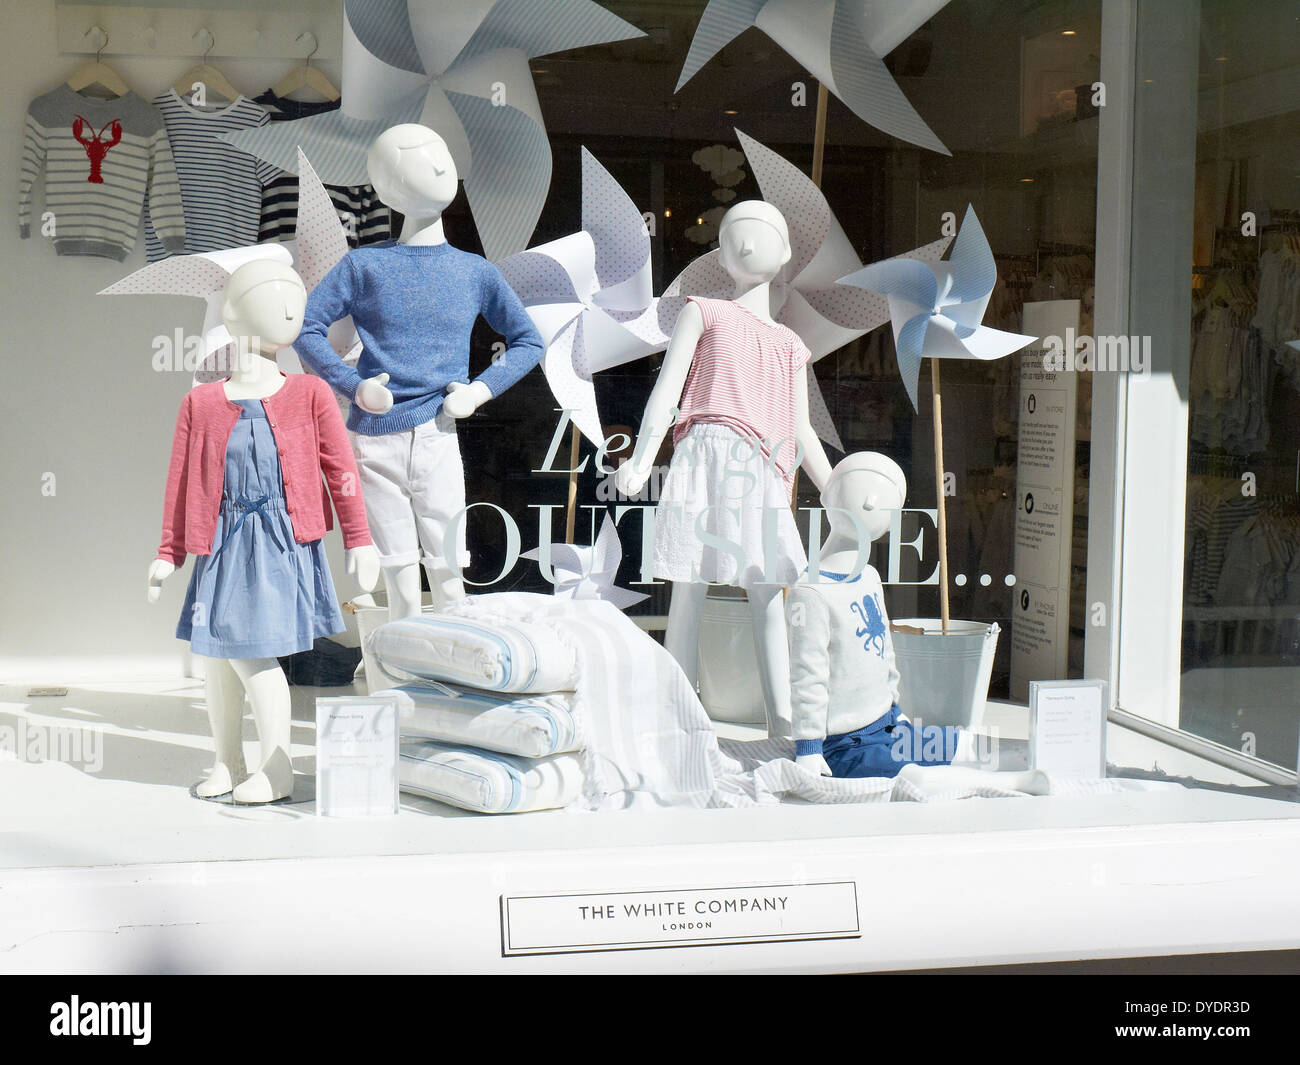 The White Company window display in King Street Manchester UK Stock Photo